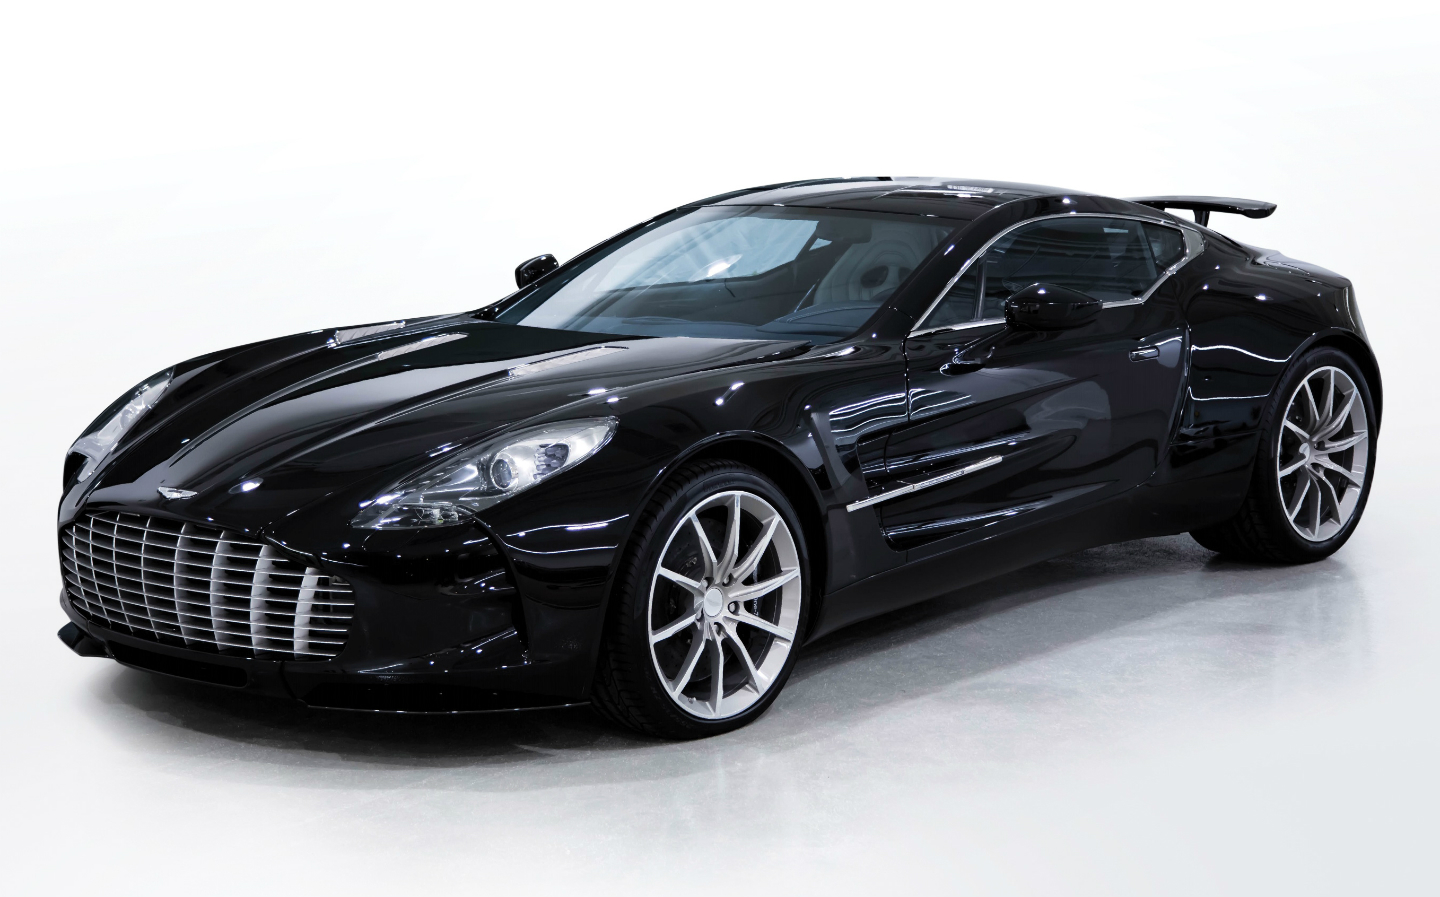 Want To Save The Planet? Buy A £1.6M, 750Bhp Aston Martin One-77 Hypercar